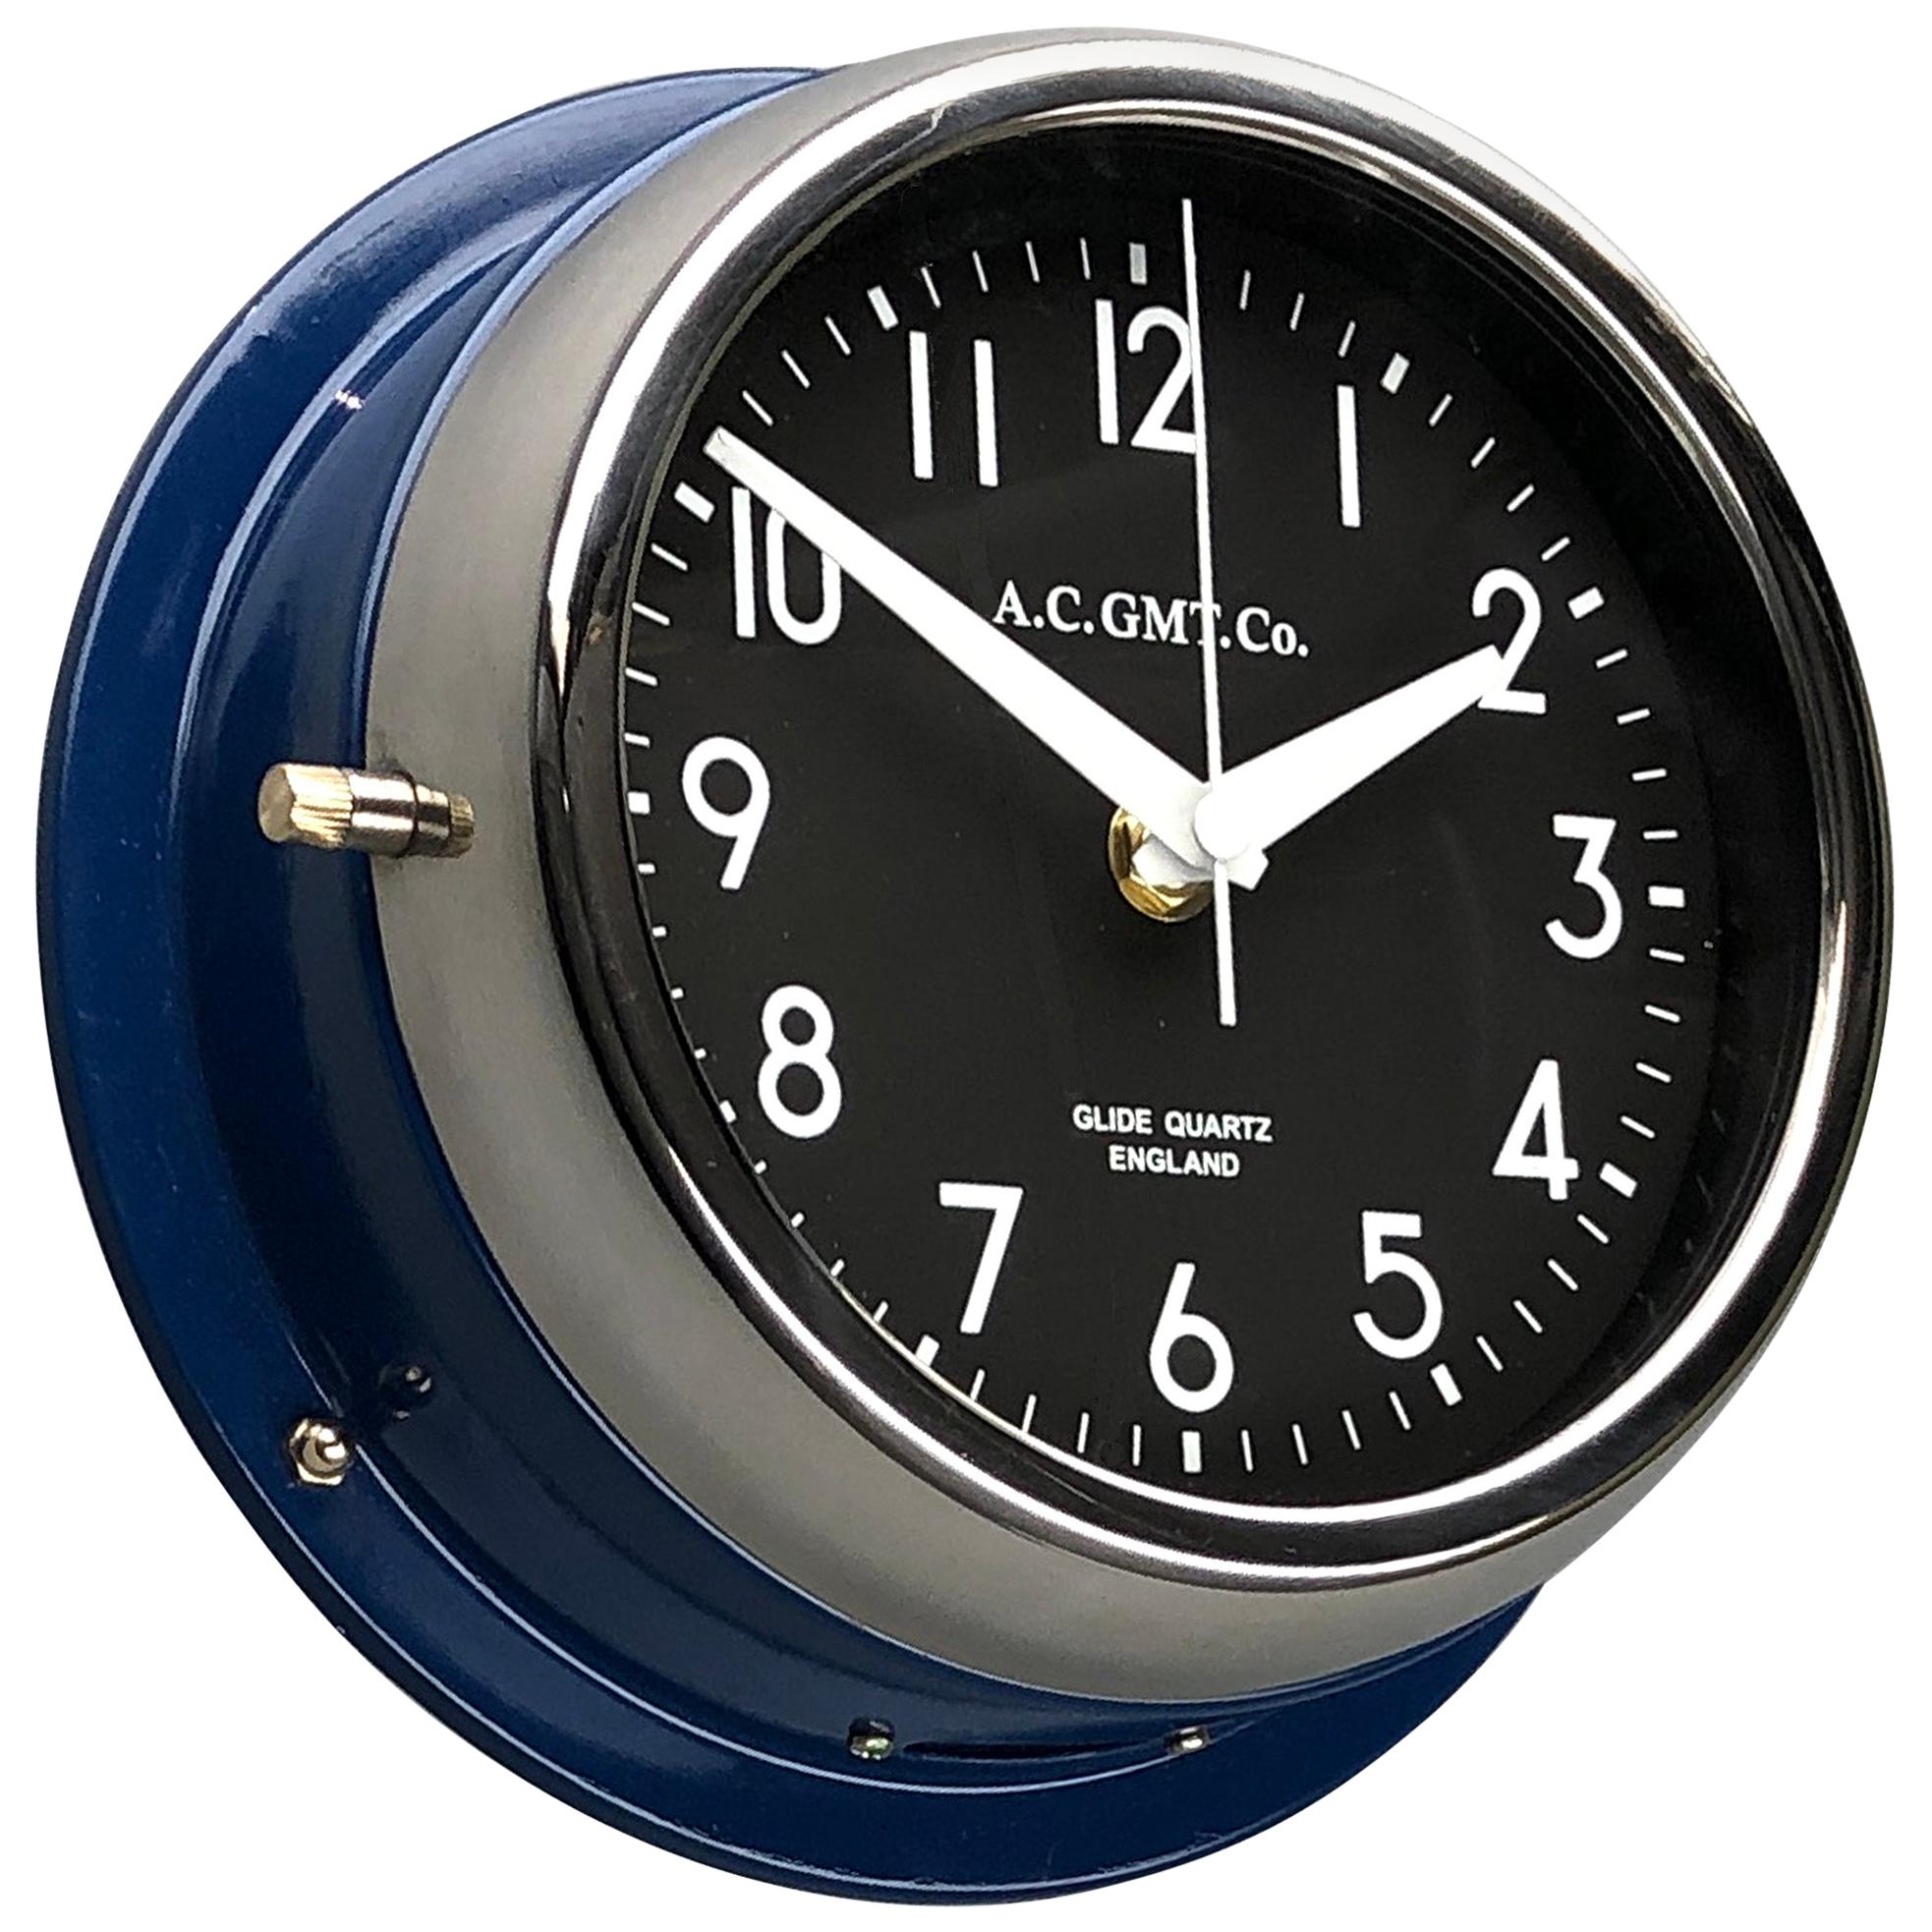 1970s British Classic Blue & Chrome AC.GMT.Co. Industrial Wall Clock Black Dial